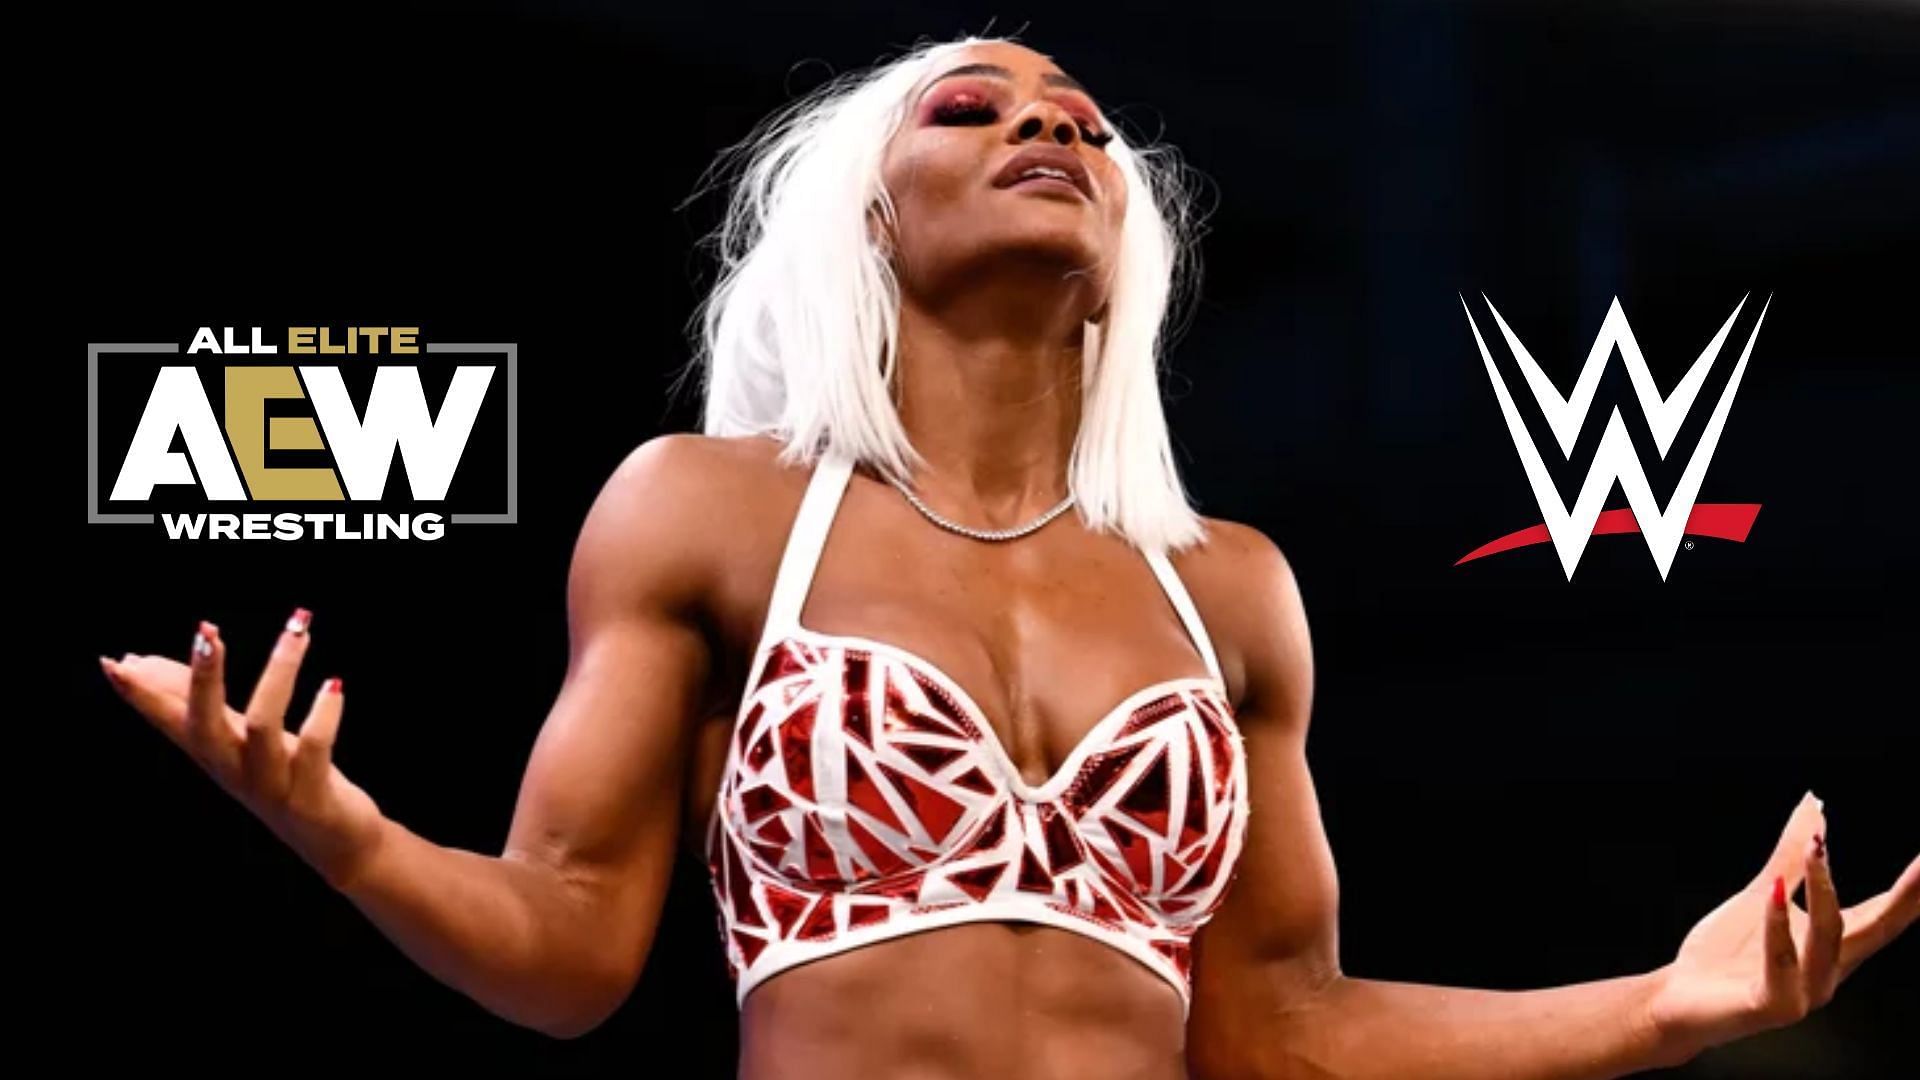 AEW Star Jade Cargill might be heading to WWE as per reports